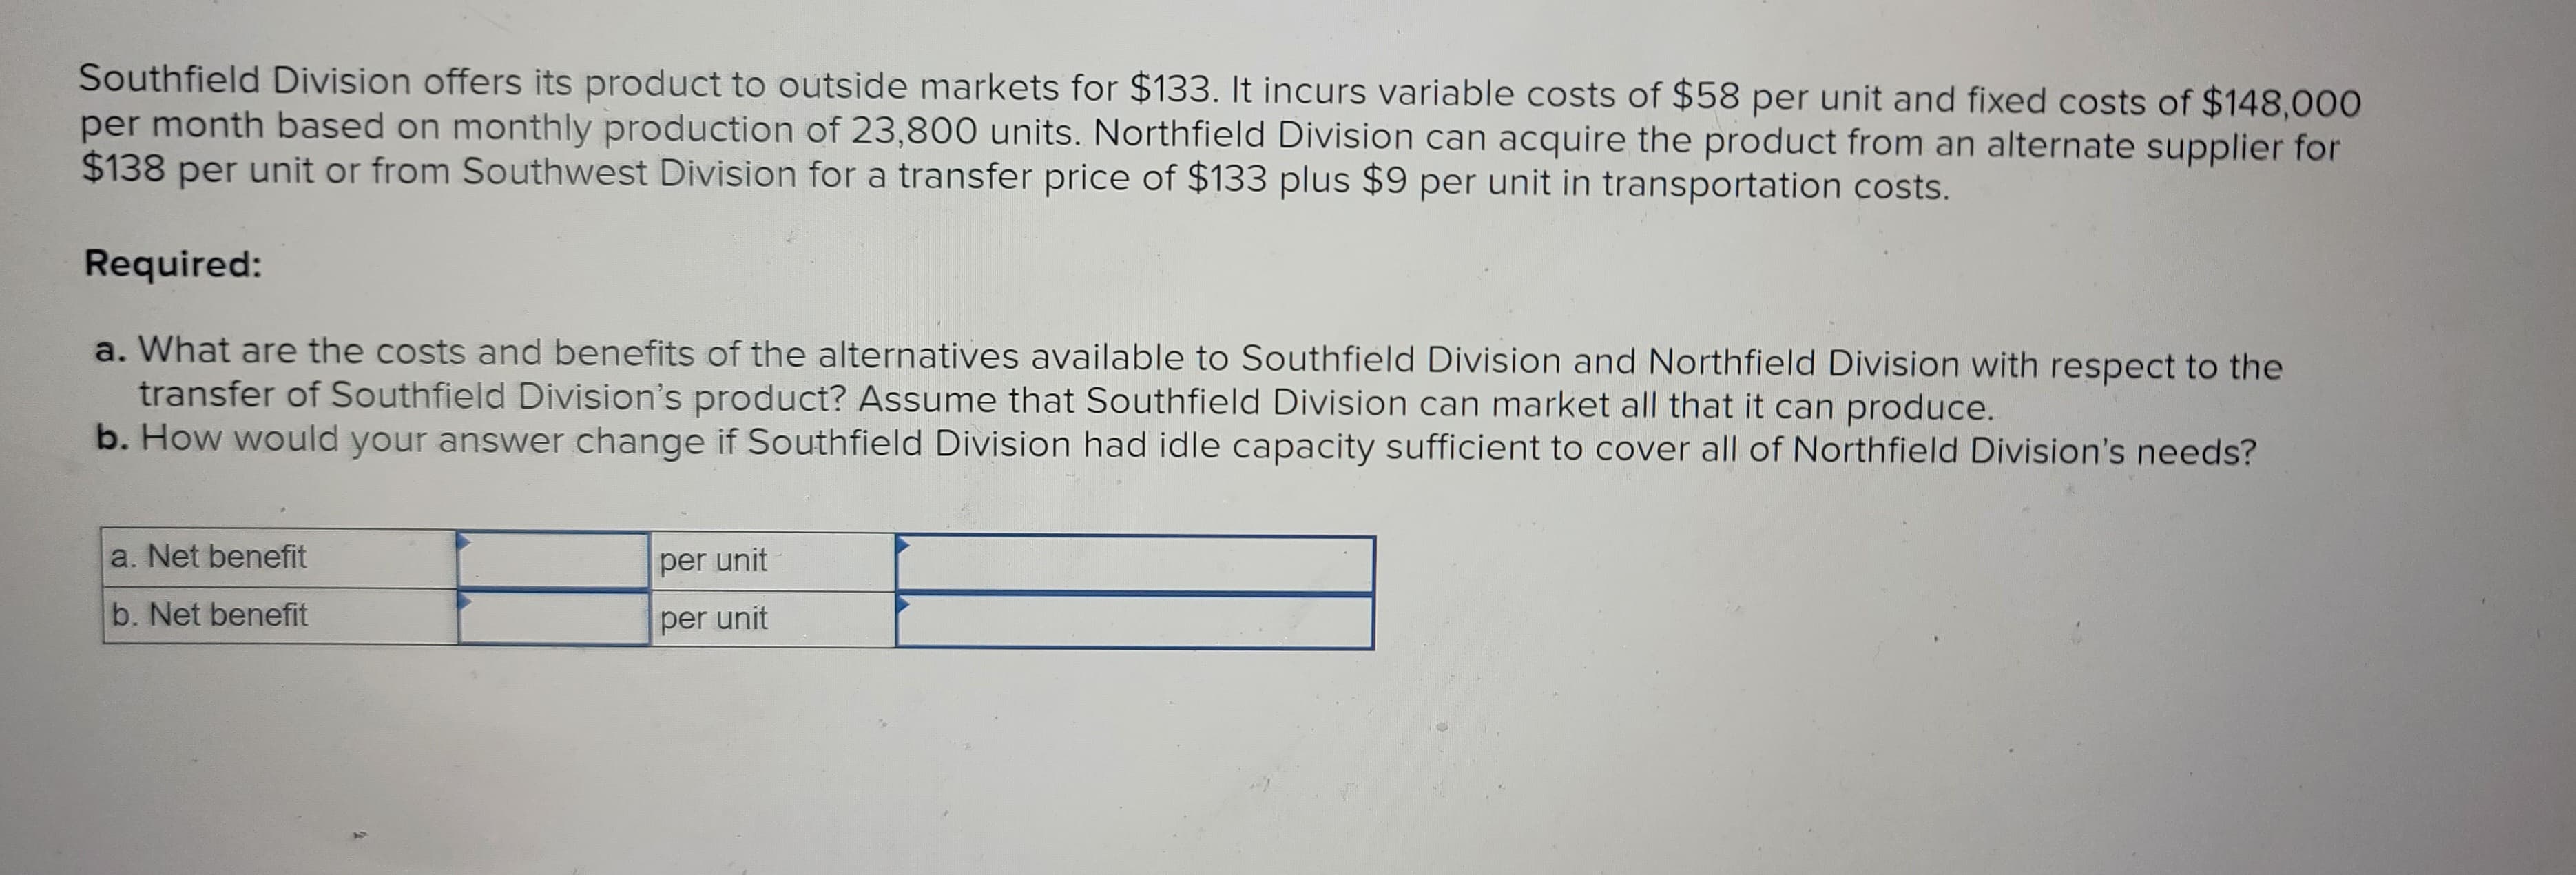 Southfield Division offers its product to outside markets for $133. It incurs variable costs of $58 per unit and fixed costs of $148,000
per month based on monthly production of 23,800 units. Northfield Division can acquire the product from an alternate supplier for
$138 per unit or from Southwest Division for a transfer price of $133 plus $9 per unit in transportation costs.
Required:
a. What are the costs and benefits of the alternatives available to Southfield Division and Northfield Division with respect to the
transfer of Southfield Division's product? Assume that Southfield Division can market all that it can produce.
b. How would your answer change if Southfield Division had idle capacity sufficient to cover all of Northfield Division's needs?
a. Net benefit
b. Net benefit
per unit
per unit